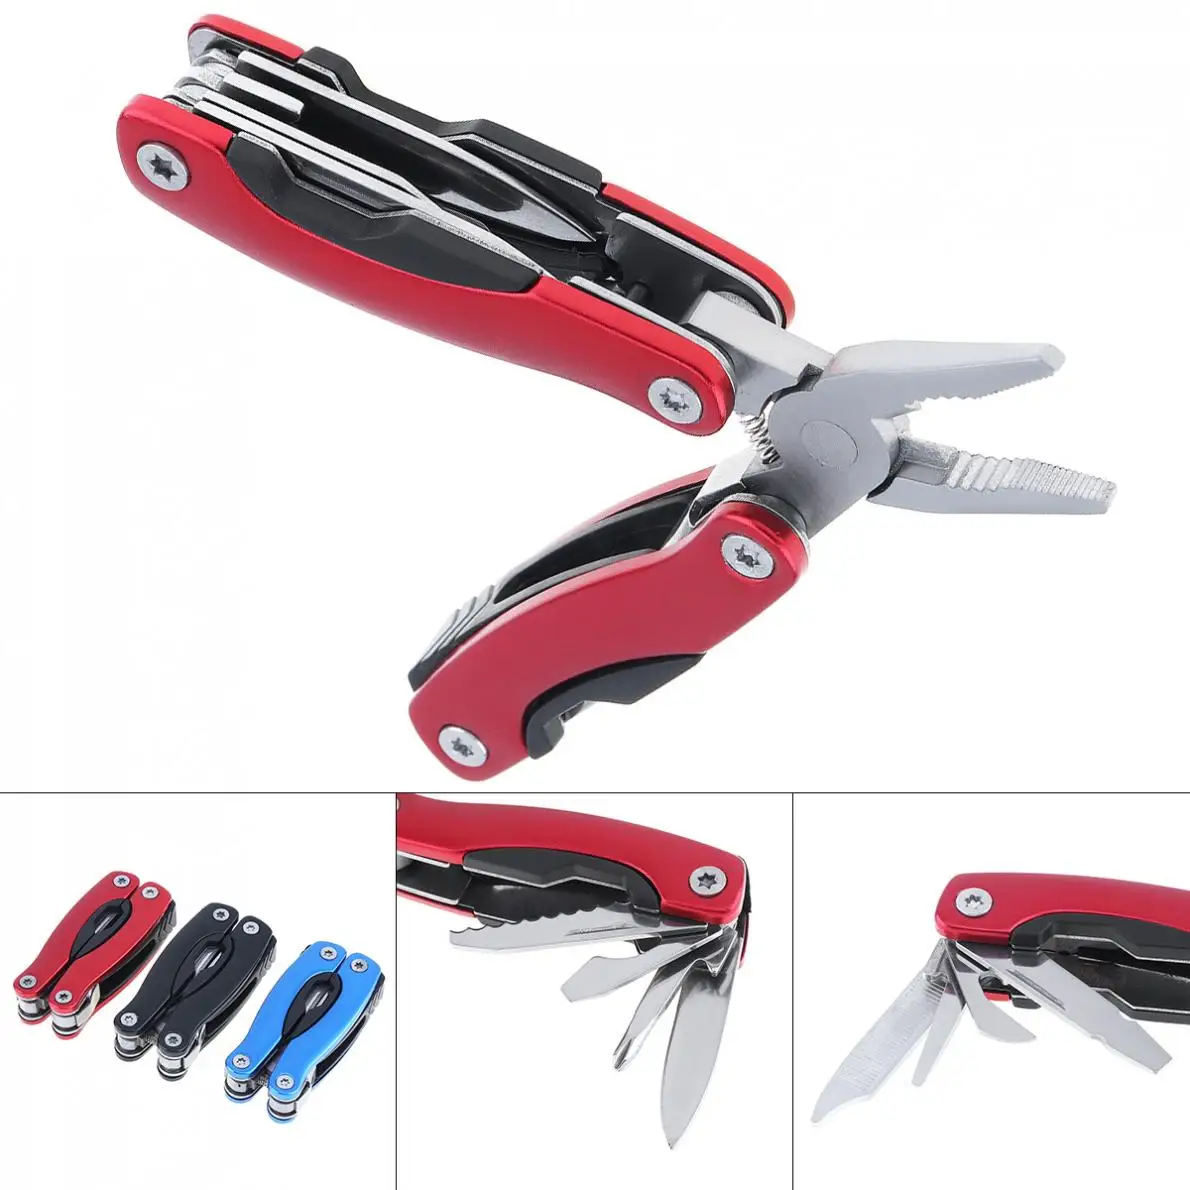 

Mini Multifunction Accessories Built-in Type Combination Folding Pliers Tool with Hand Polished Surface Treatment and Nylon Bag